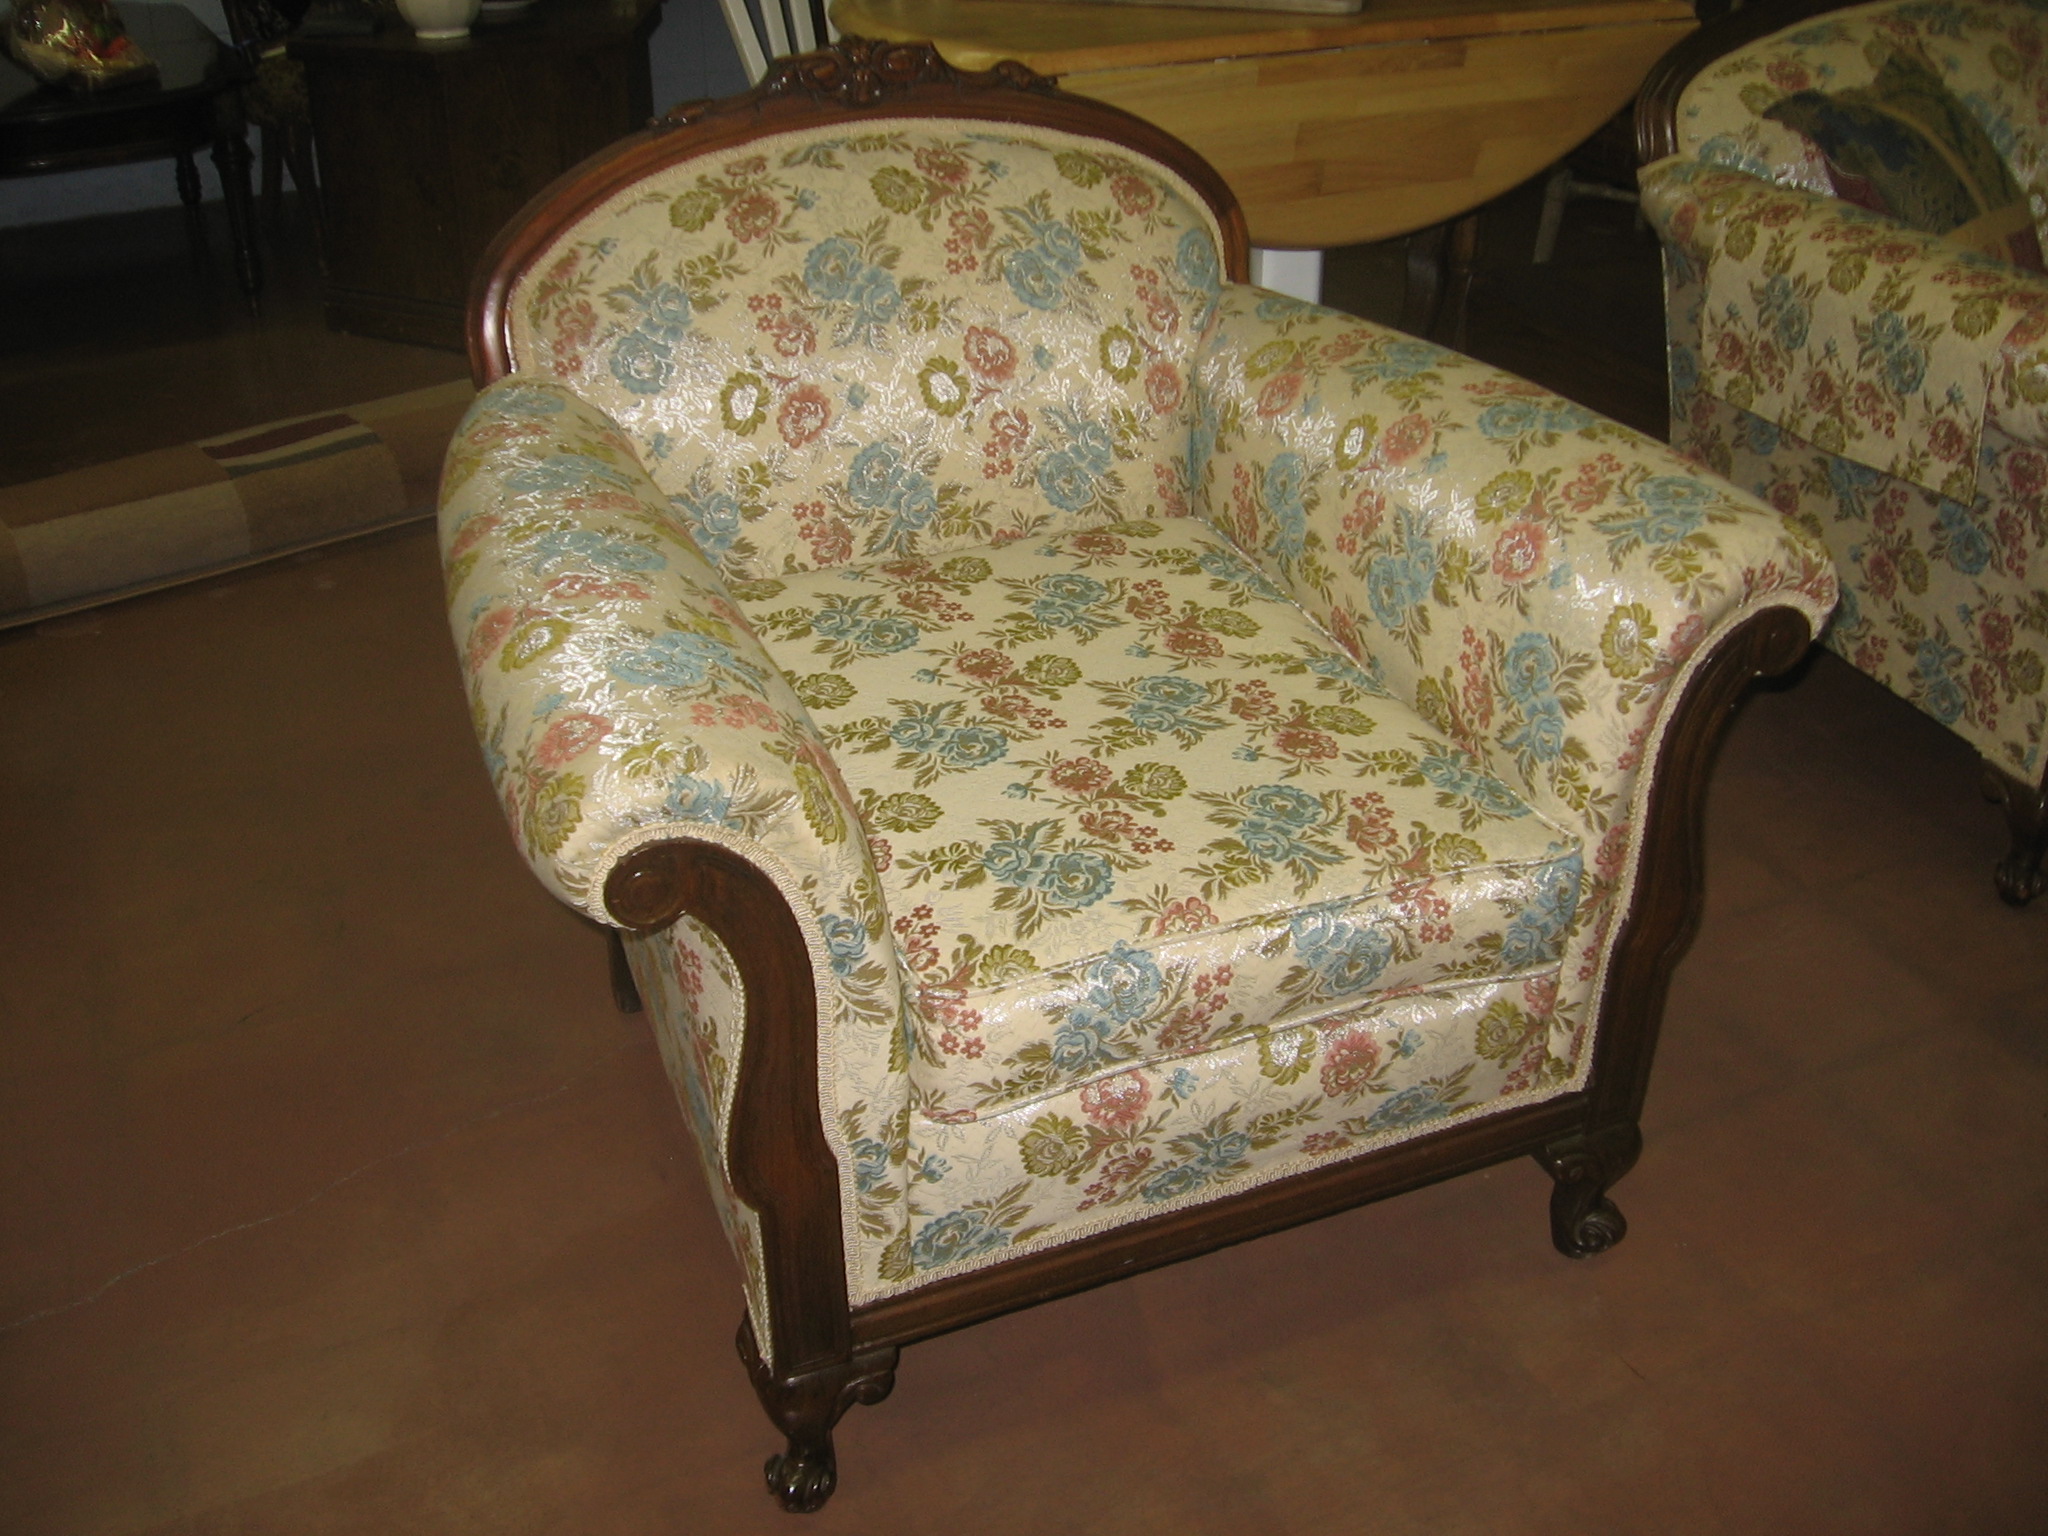 a settee is shown with floral print on it